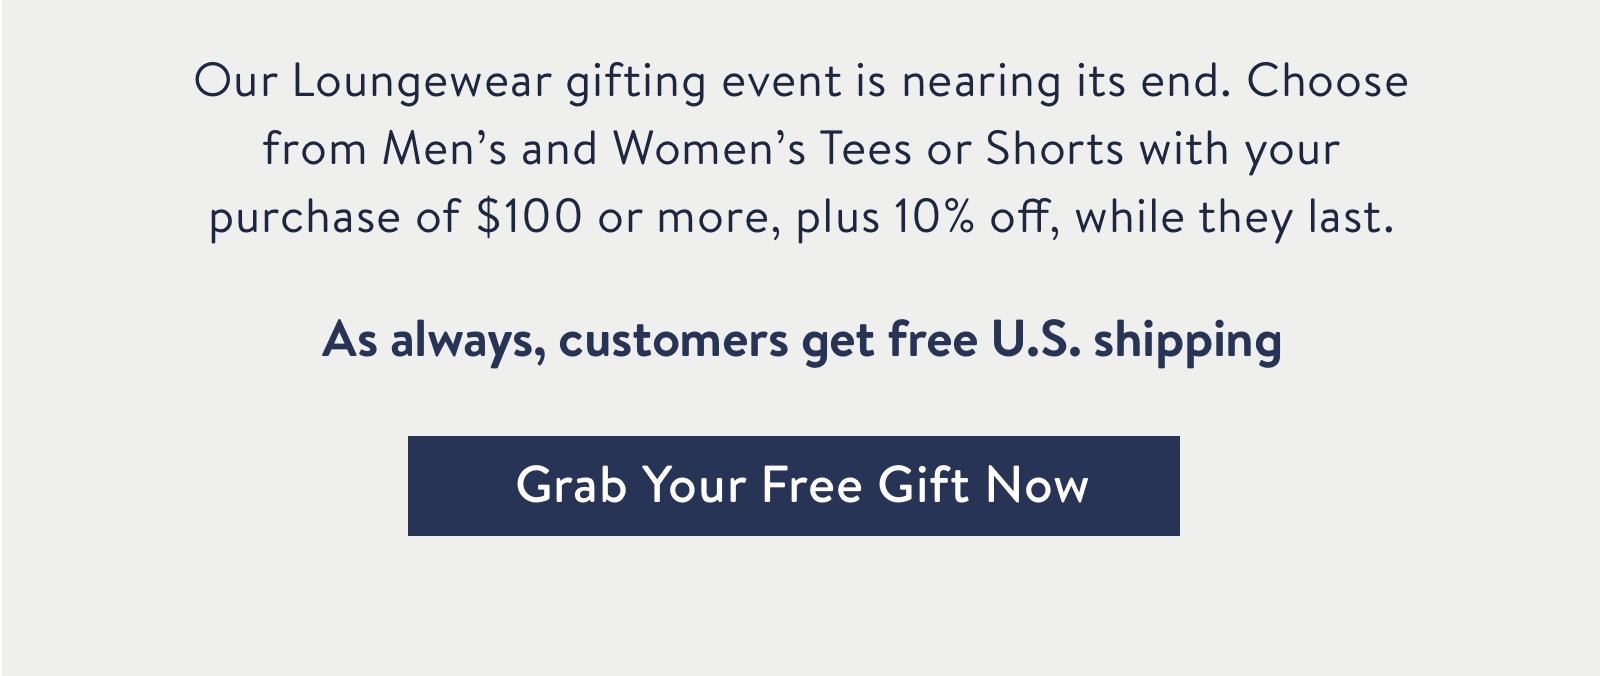 Our Loungewear gifting event nearing its end. Choose from Men's and Women's Tees or Shorts with your purchase of $100+ , plus 10% off your order, while they last.